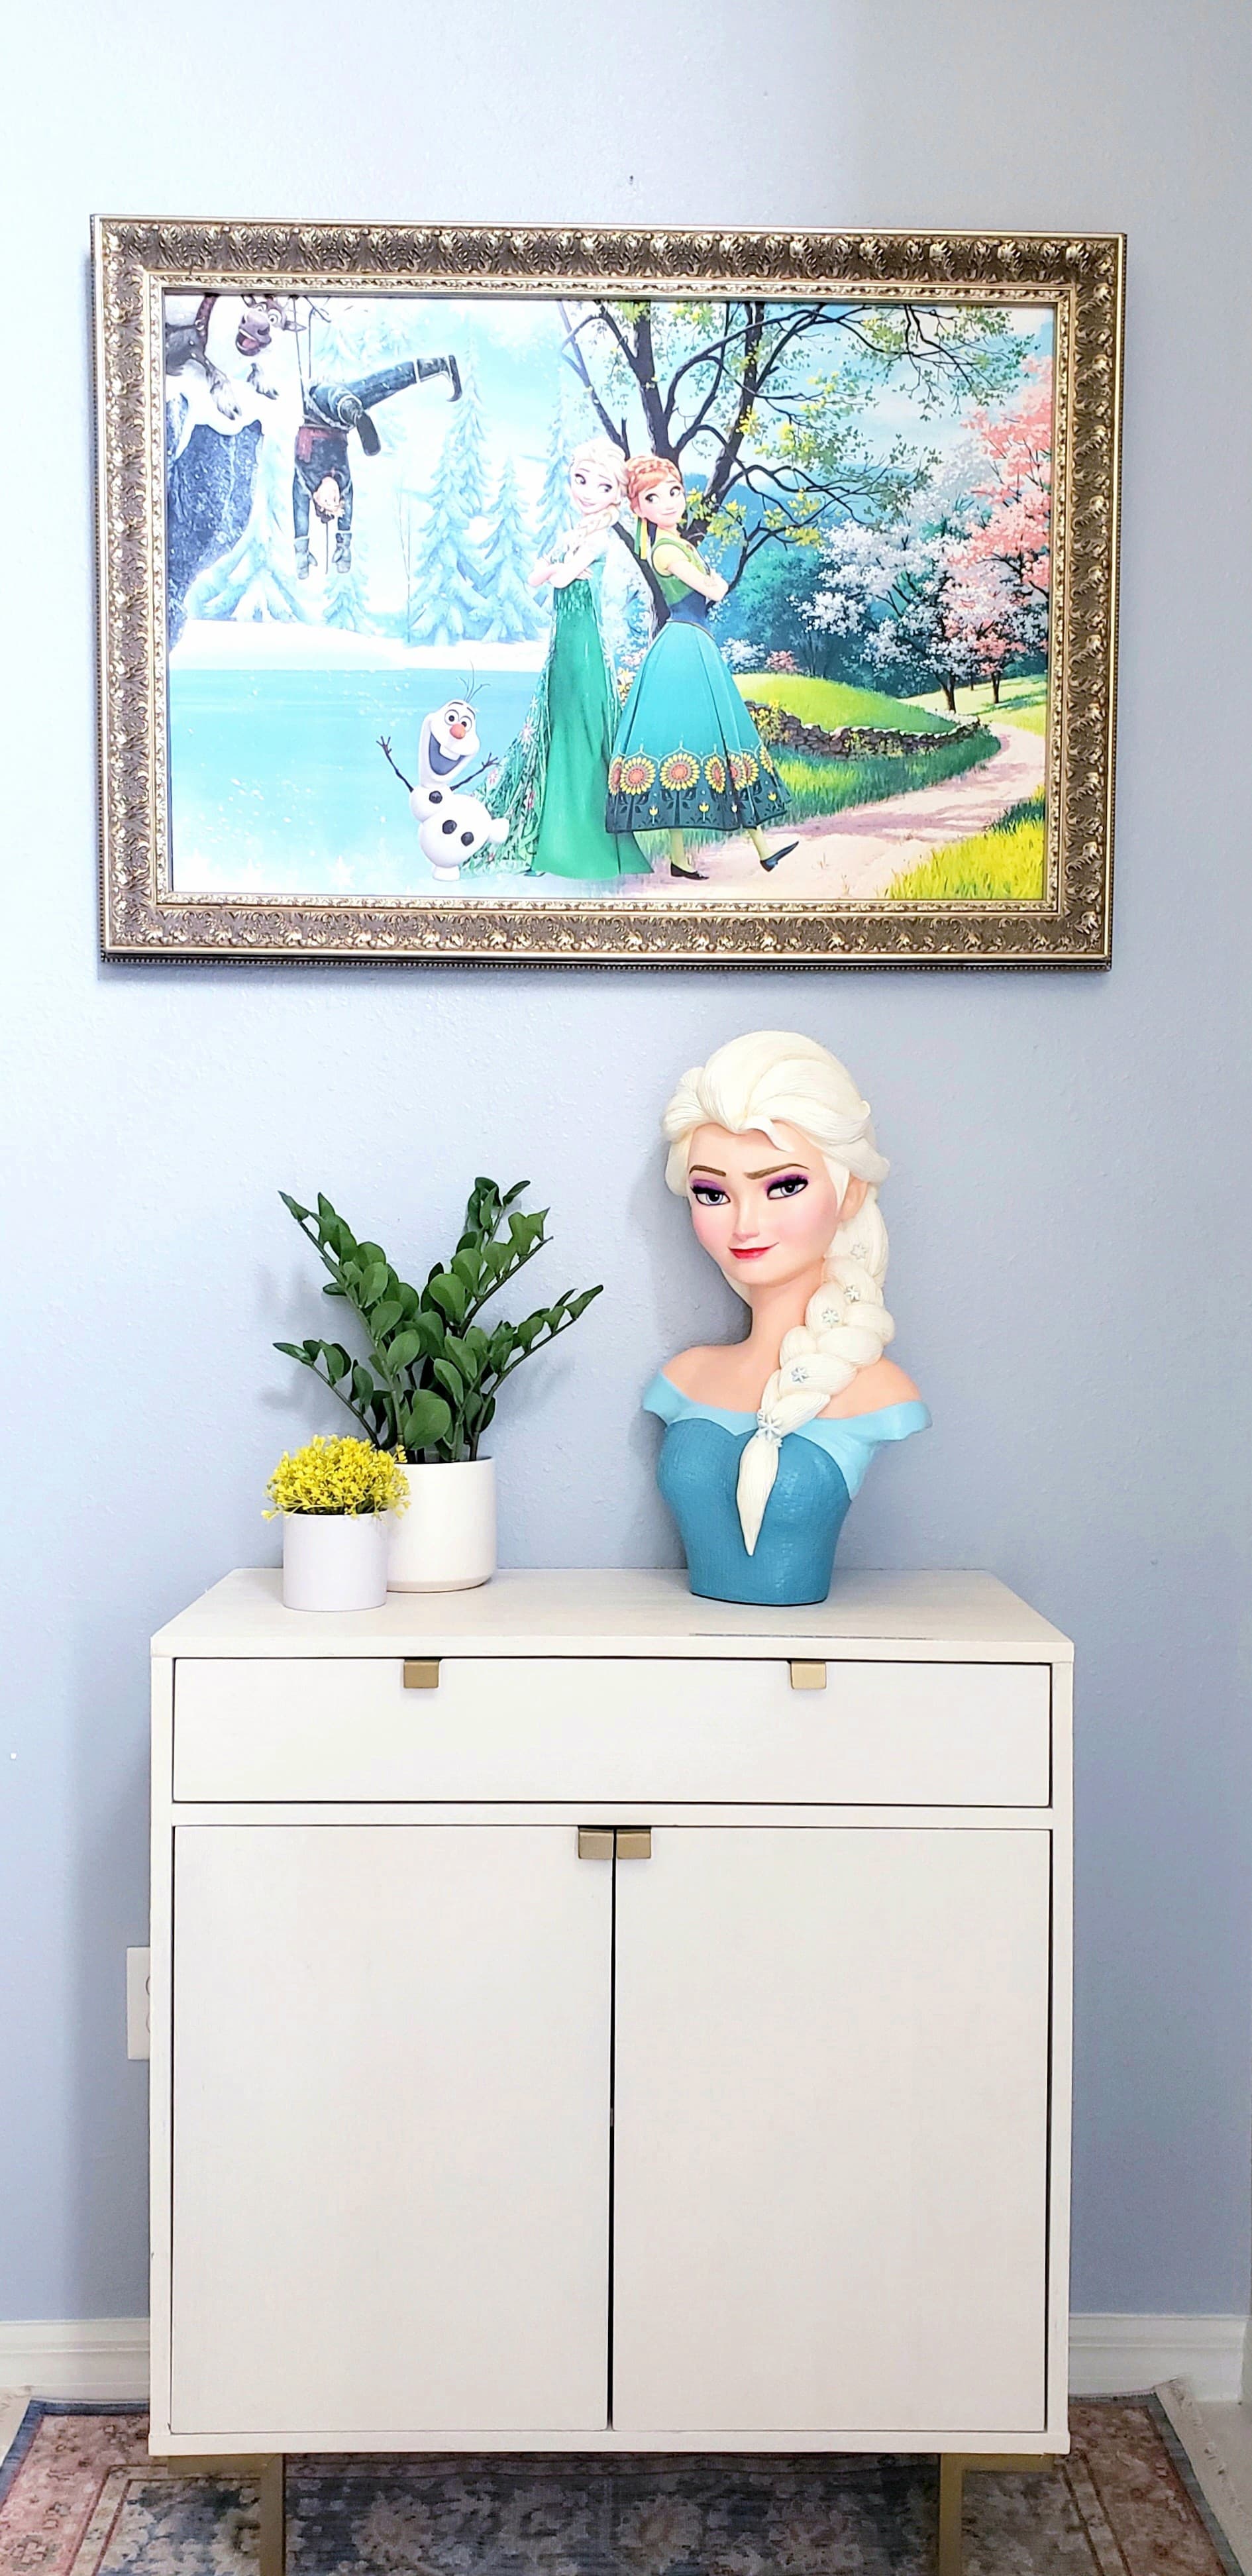 Elsa welcomes YOU to 'Frozen in Florida' home by "Happily Ever After Playhouses"